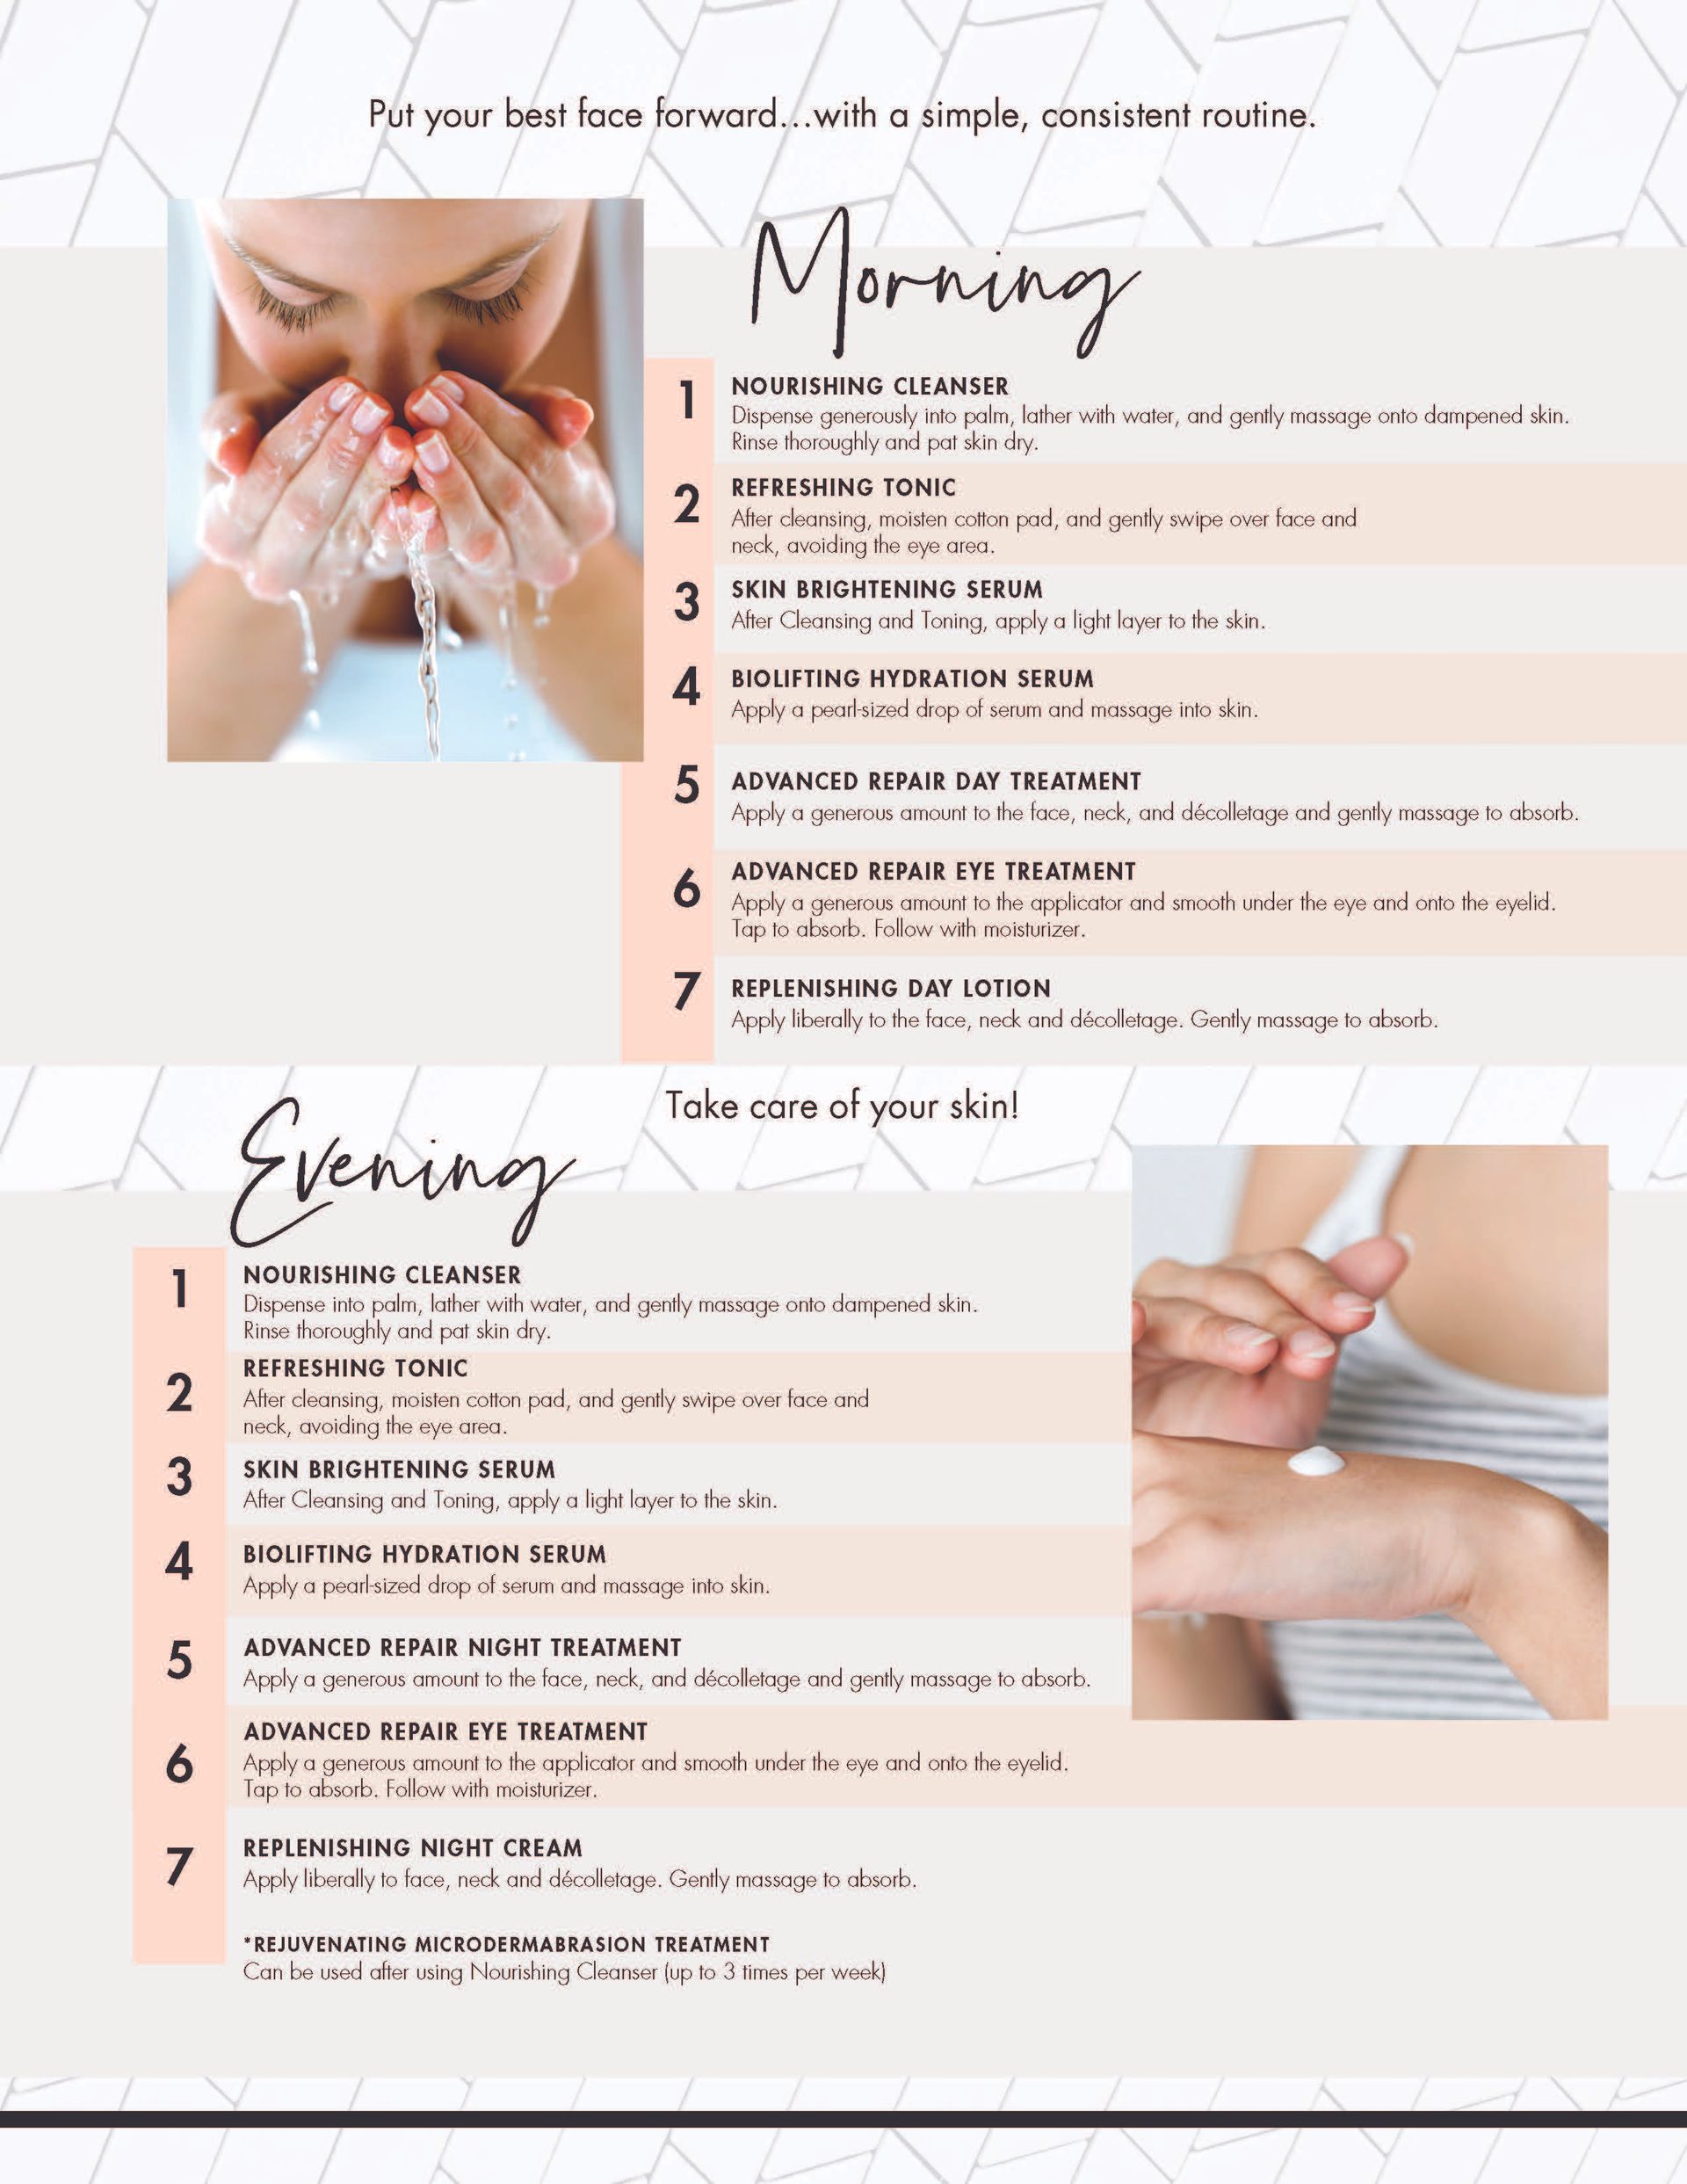 Morning and Evening Healthy Skincare Routine